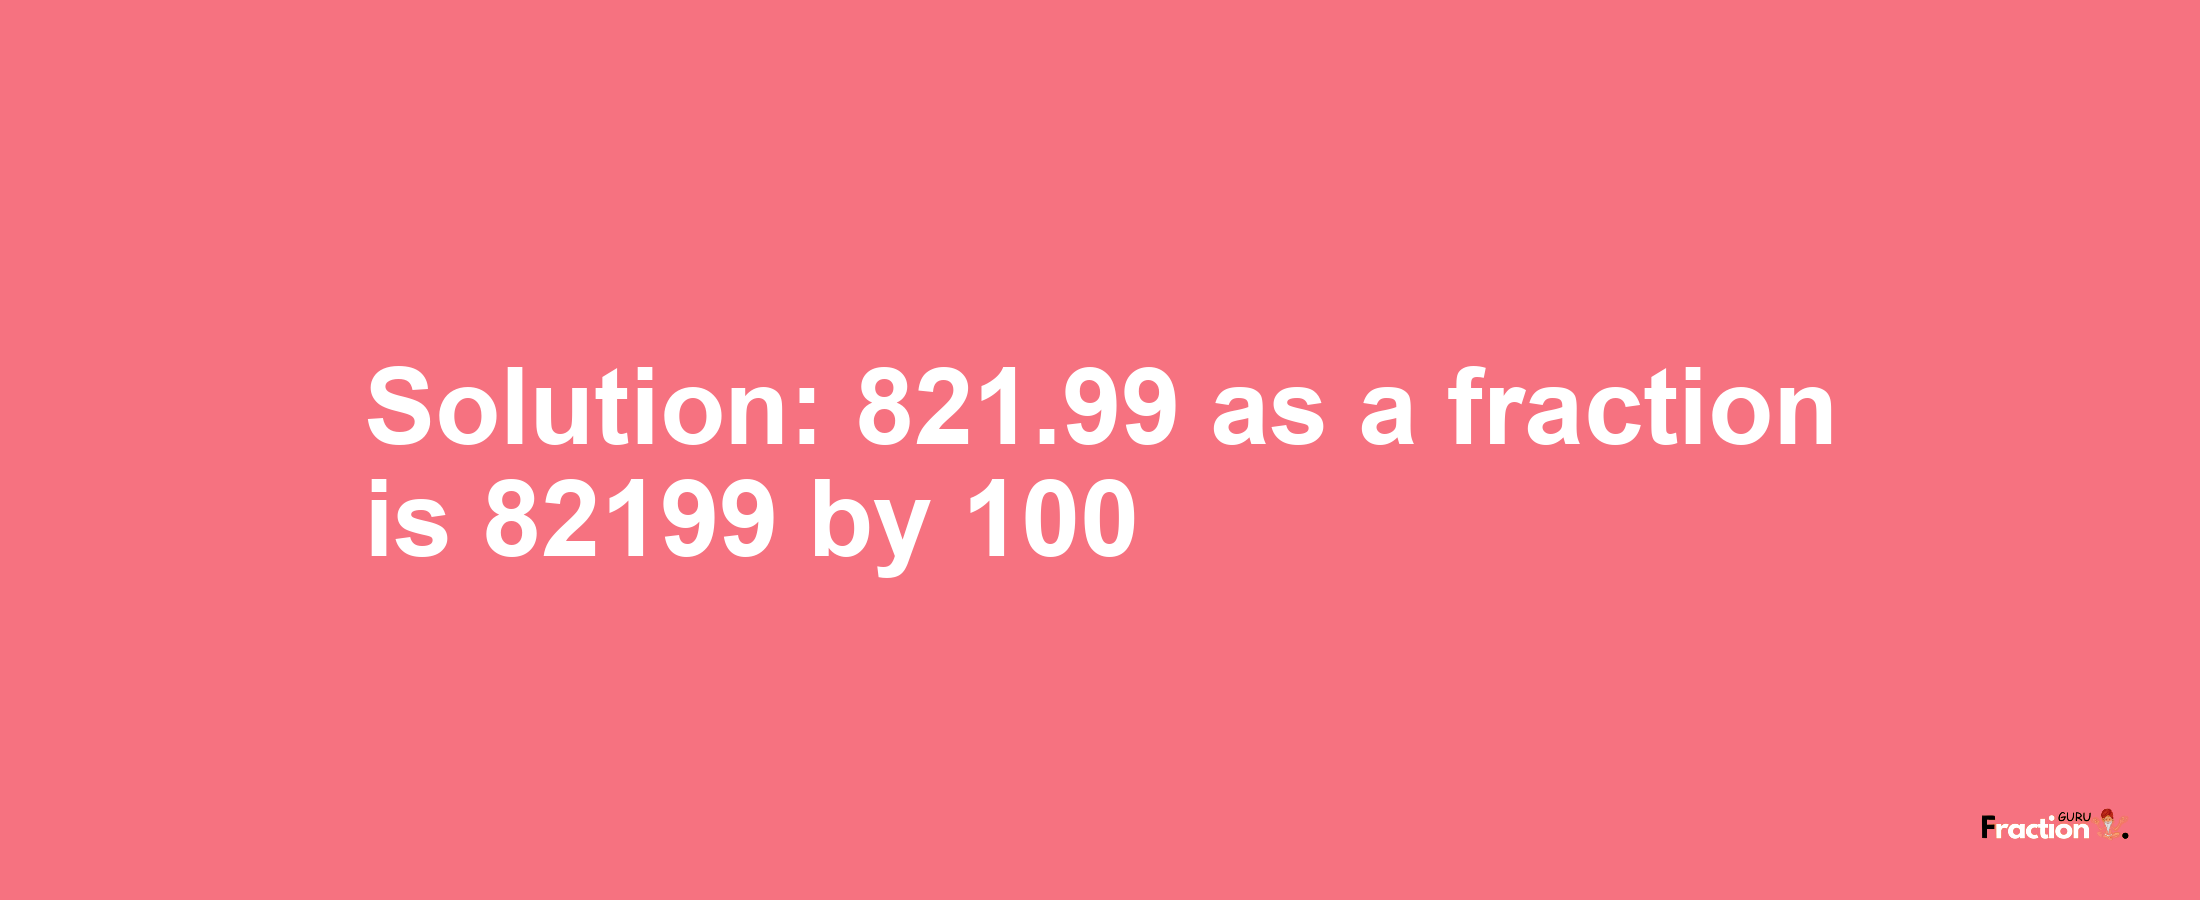 Solution:821.99 as a fraction is 82199/100